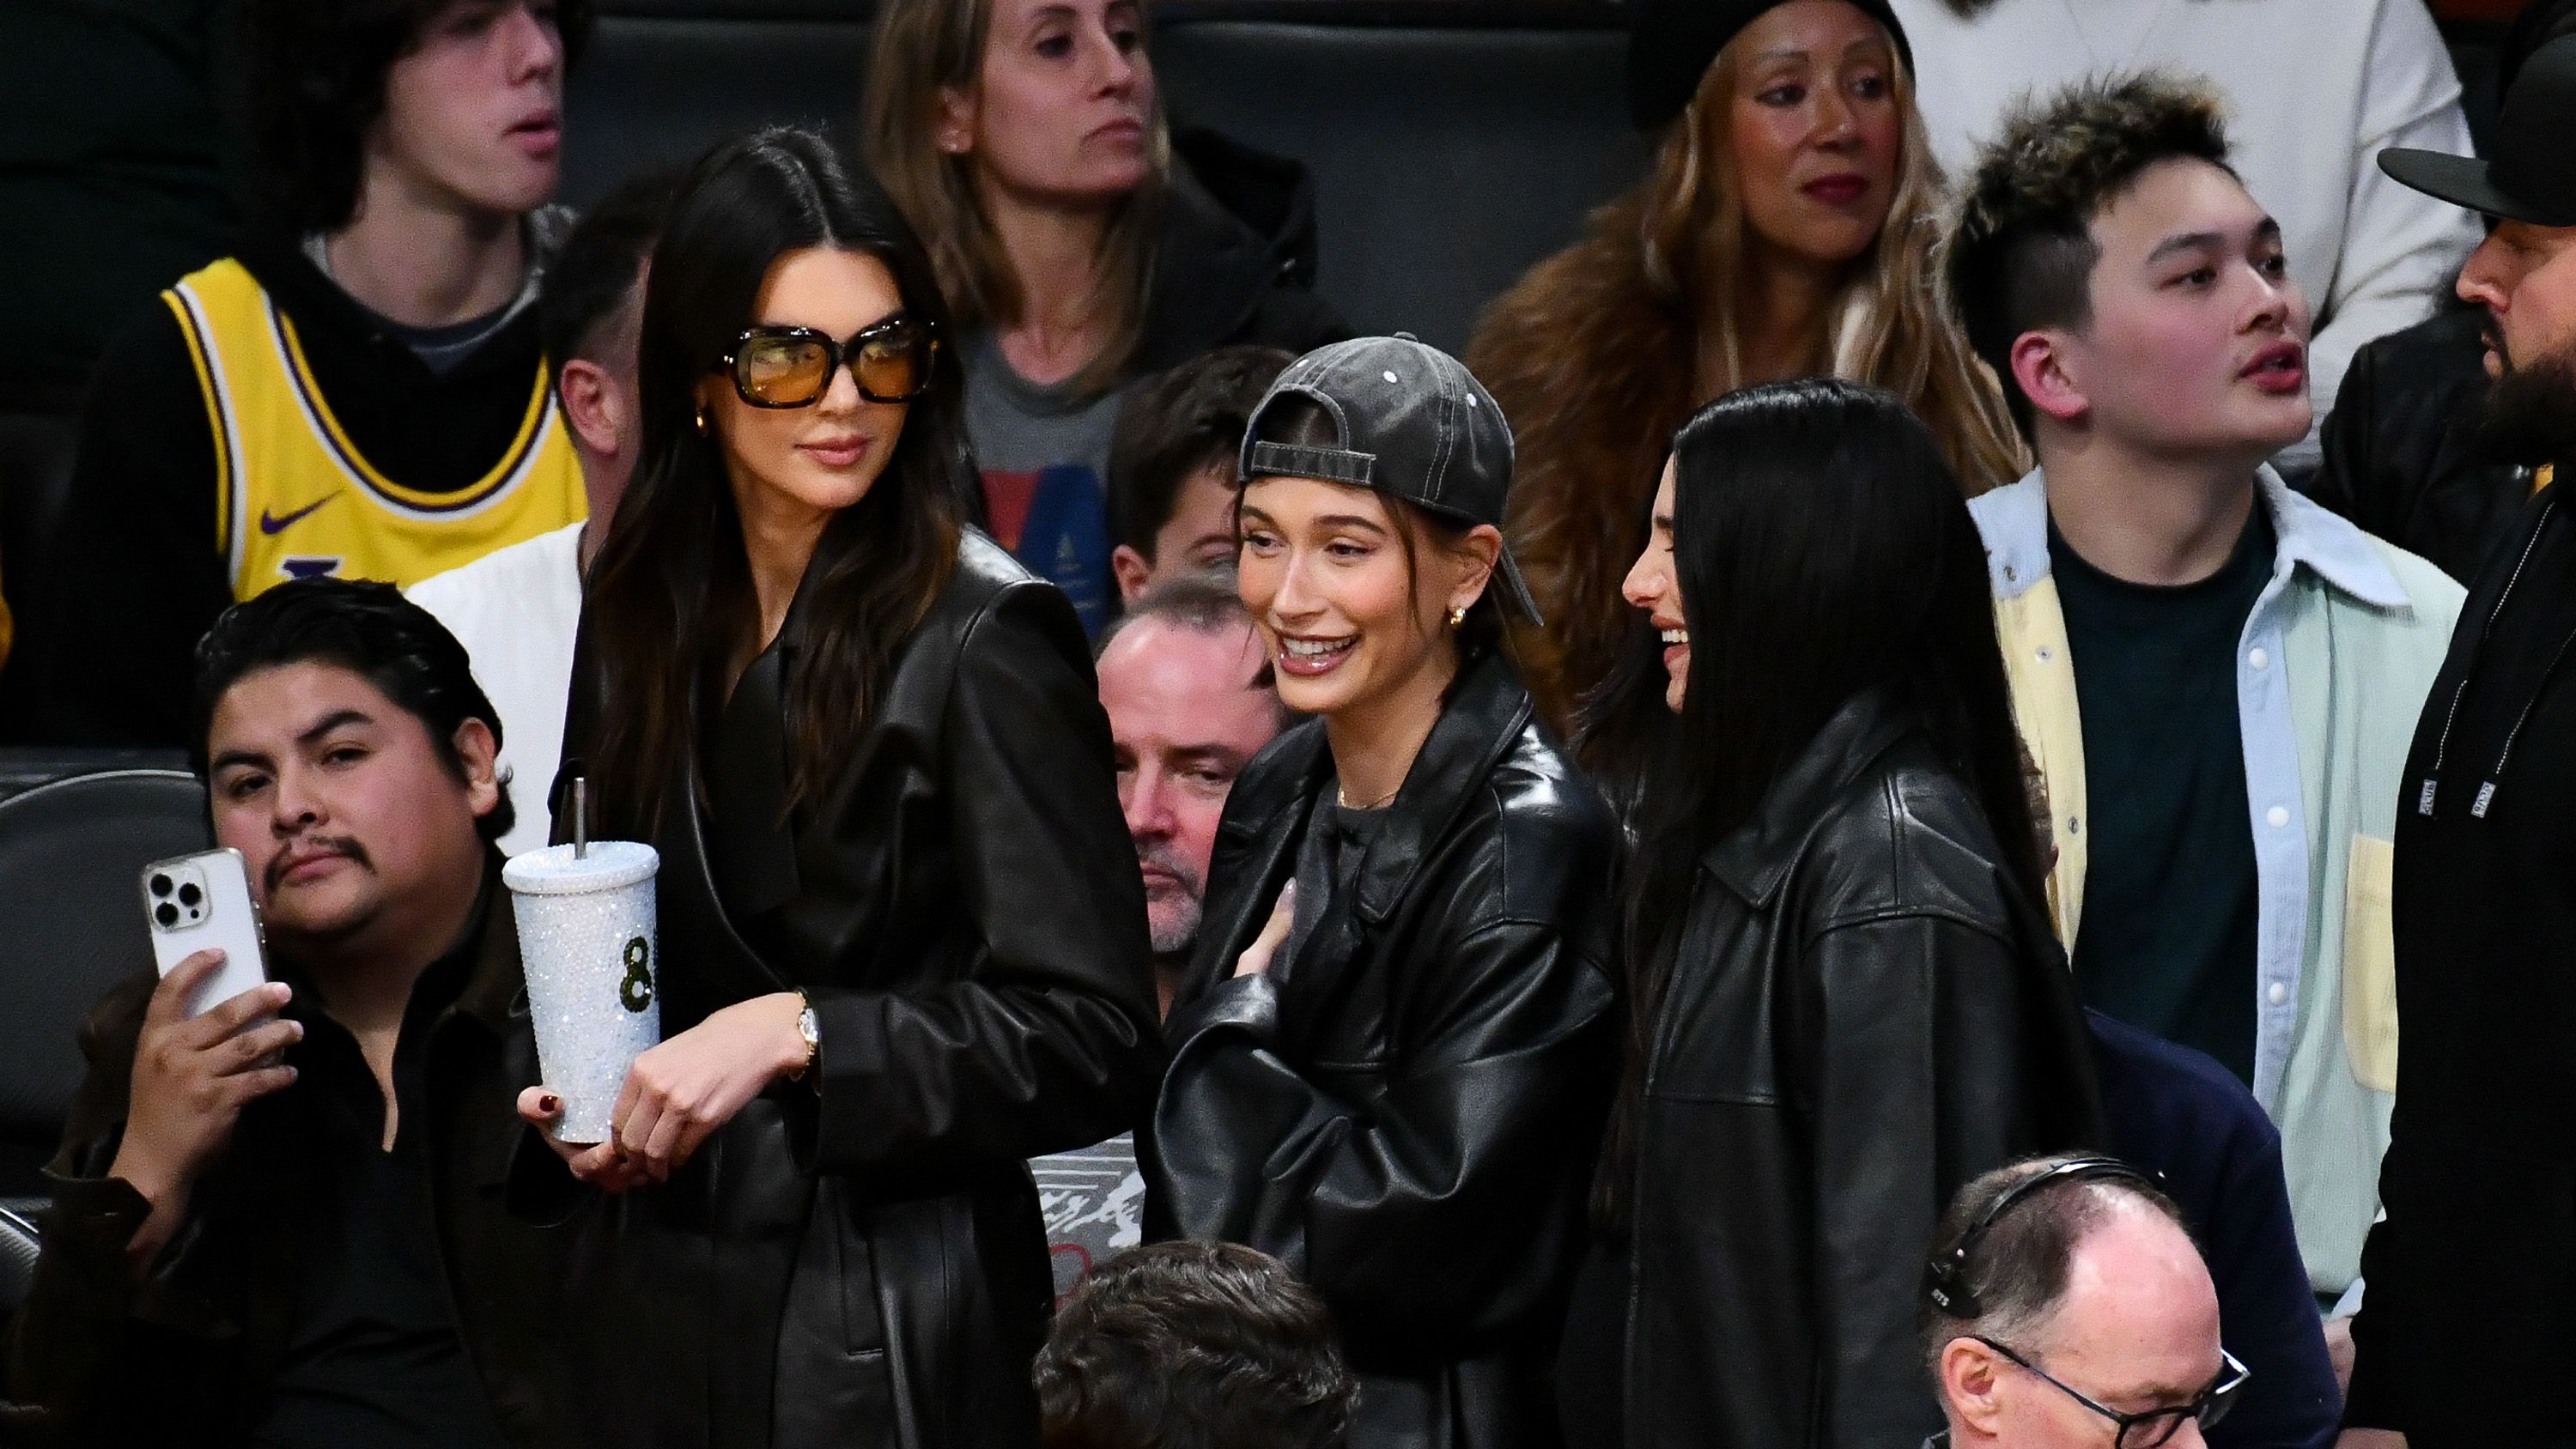 https://hips.hearstapps.com/hmg-prod/images/kendall-jenner-and-hailey-bieber-attend-a-basketball-game-news-photo-1705408562.jpg?crop=1xw:0.84375xh;center,top